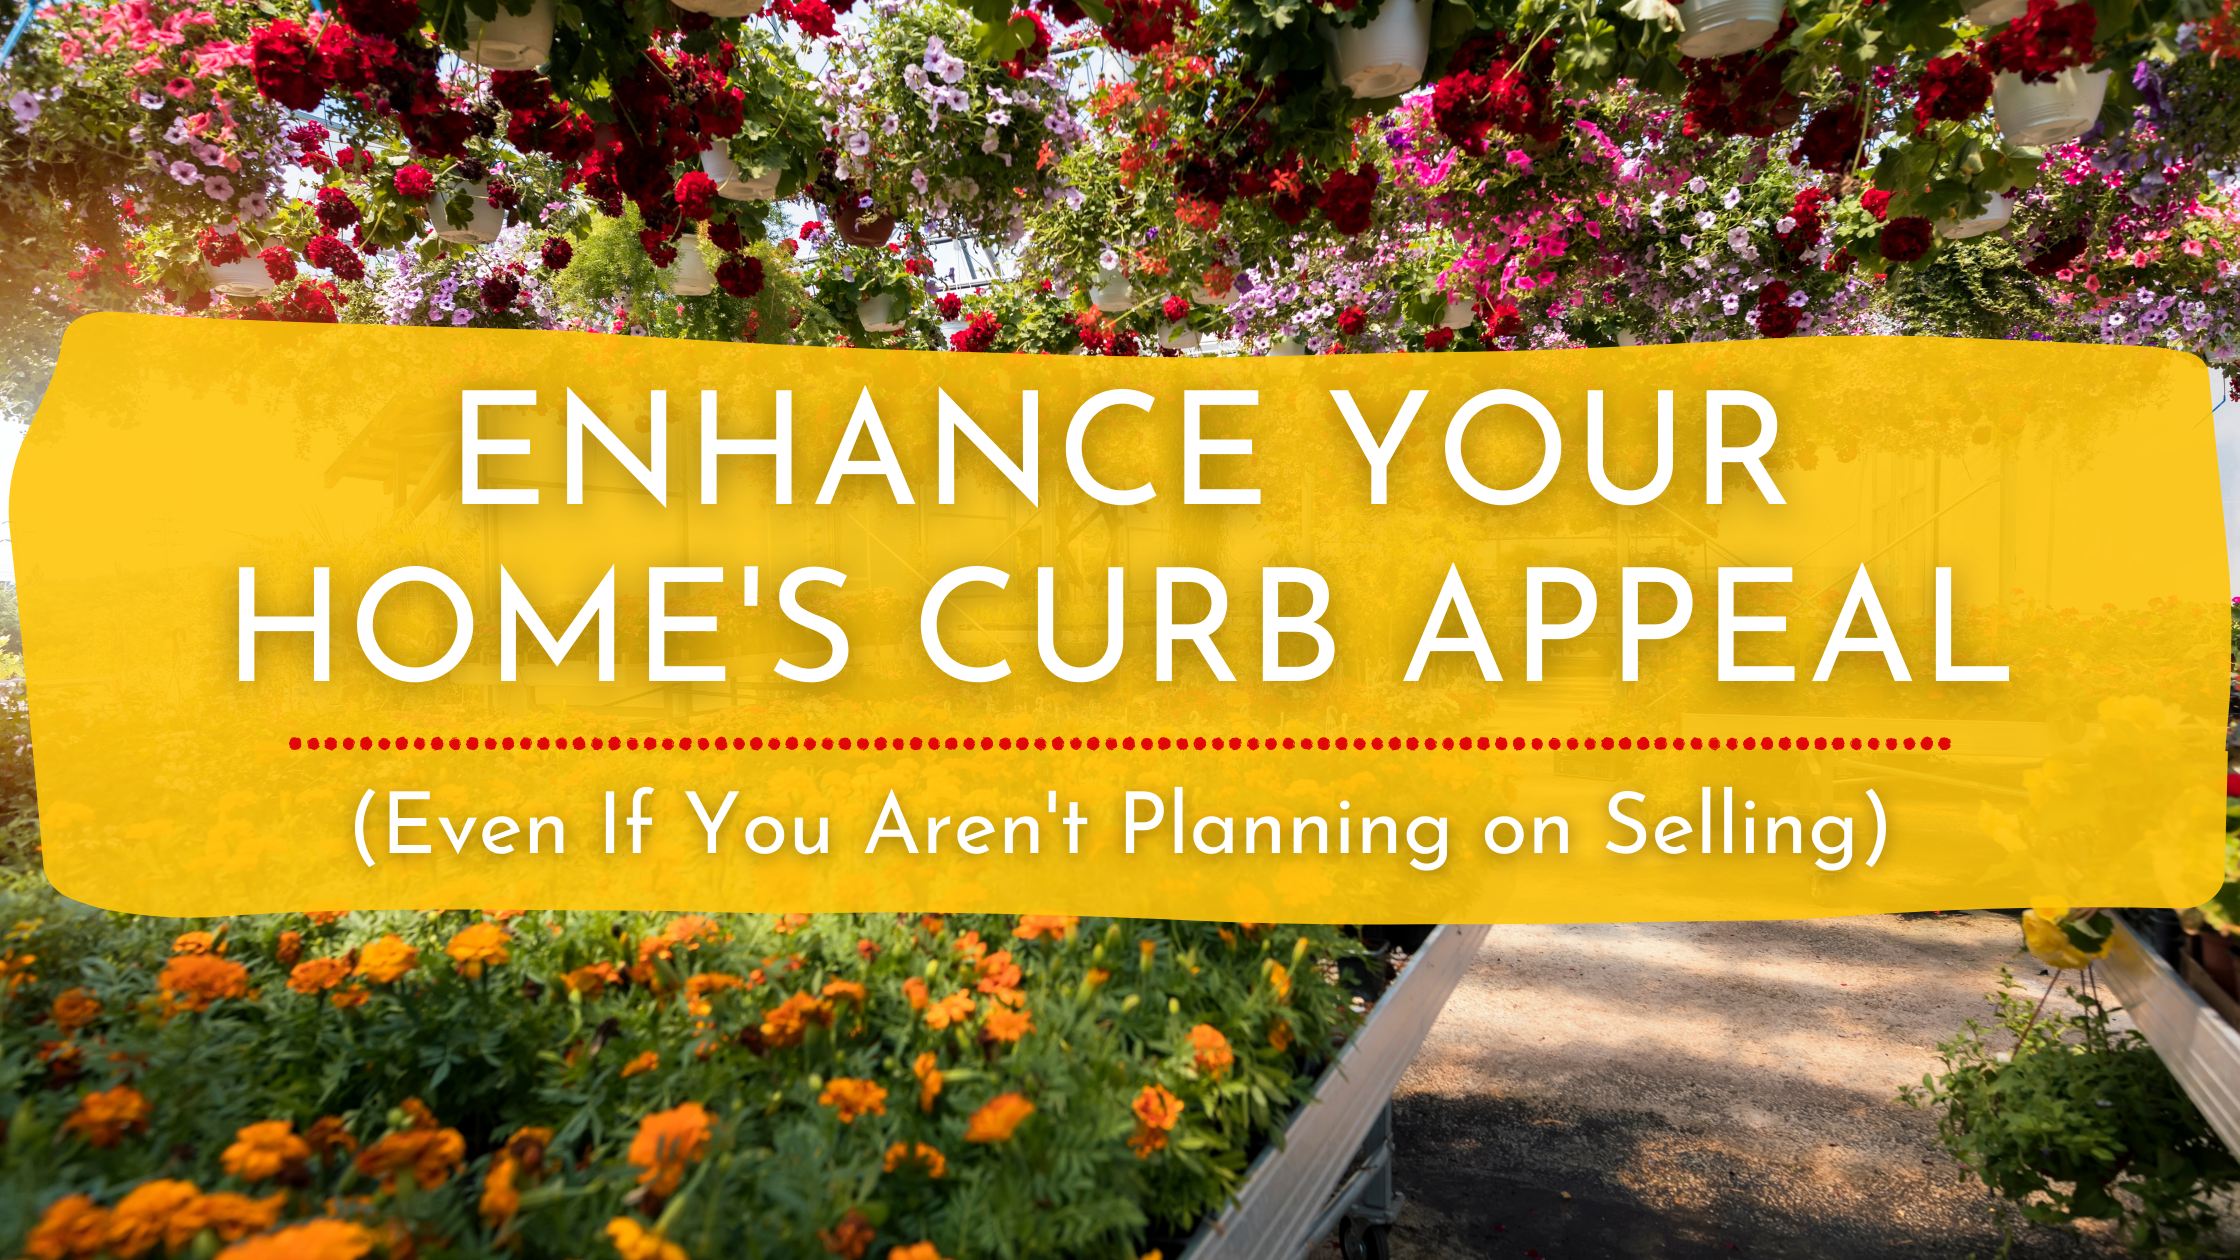 Enhance Your Home's Curb Appeal (Even If You Aren't Planning on Selling)